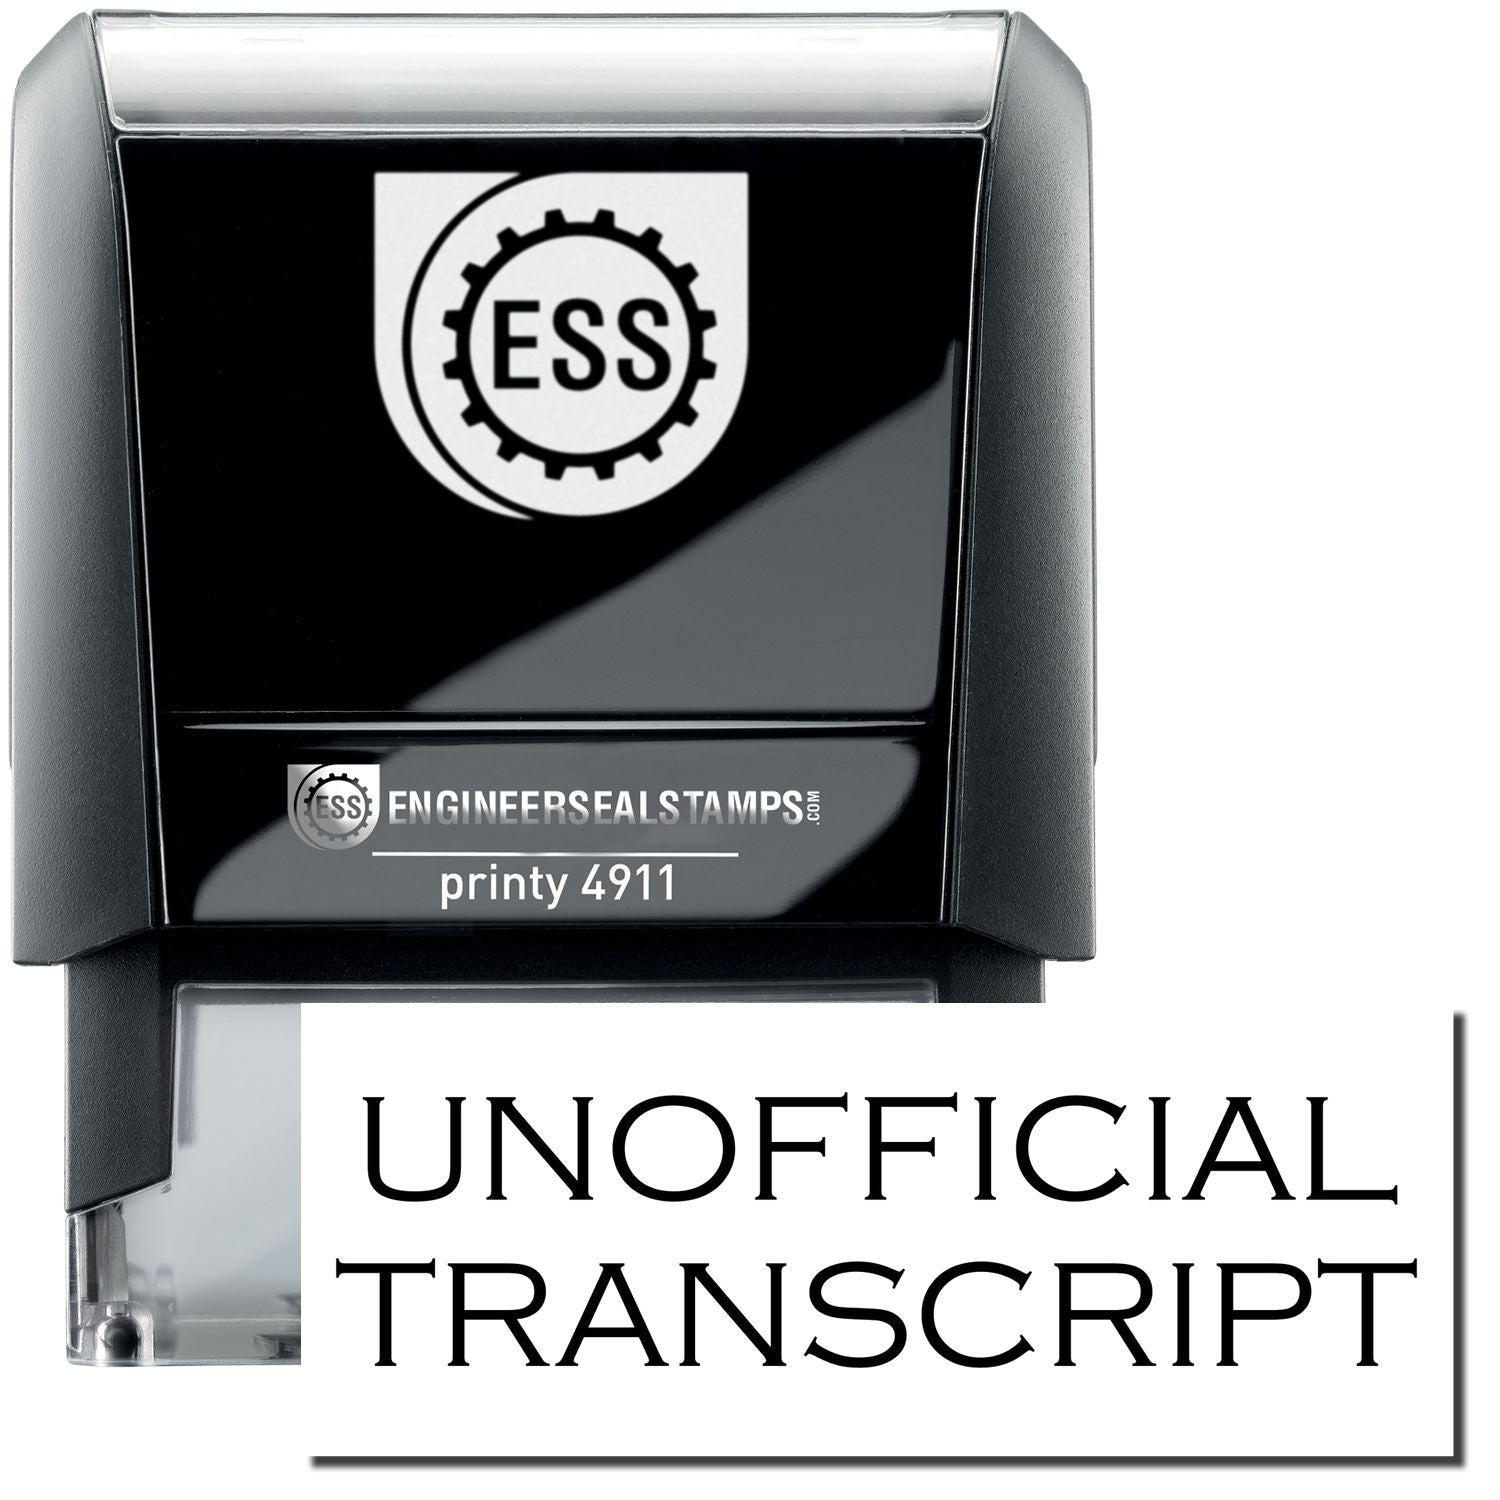 A self-inking stamp with a stamped image showing how the text "UNOFFICIAL TRANSCRIPT" is displayed after stamping.